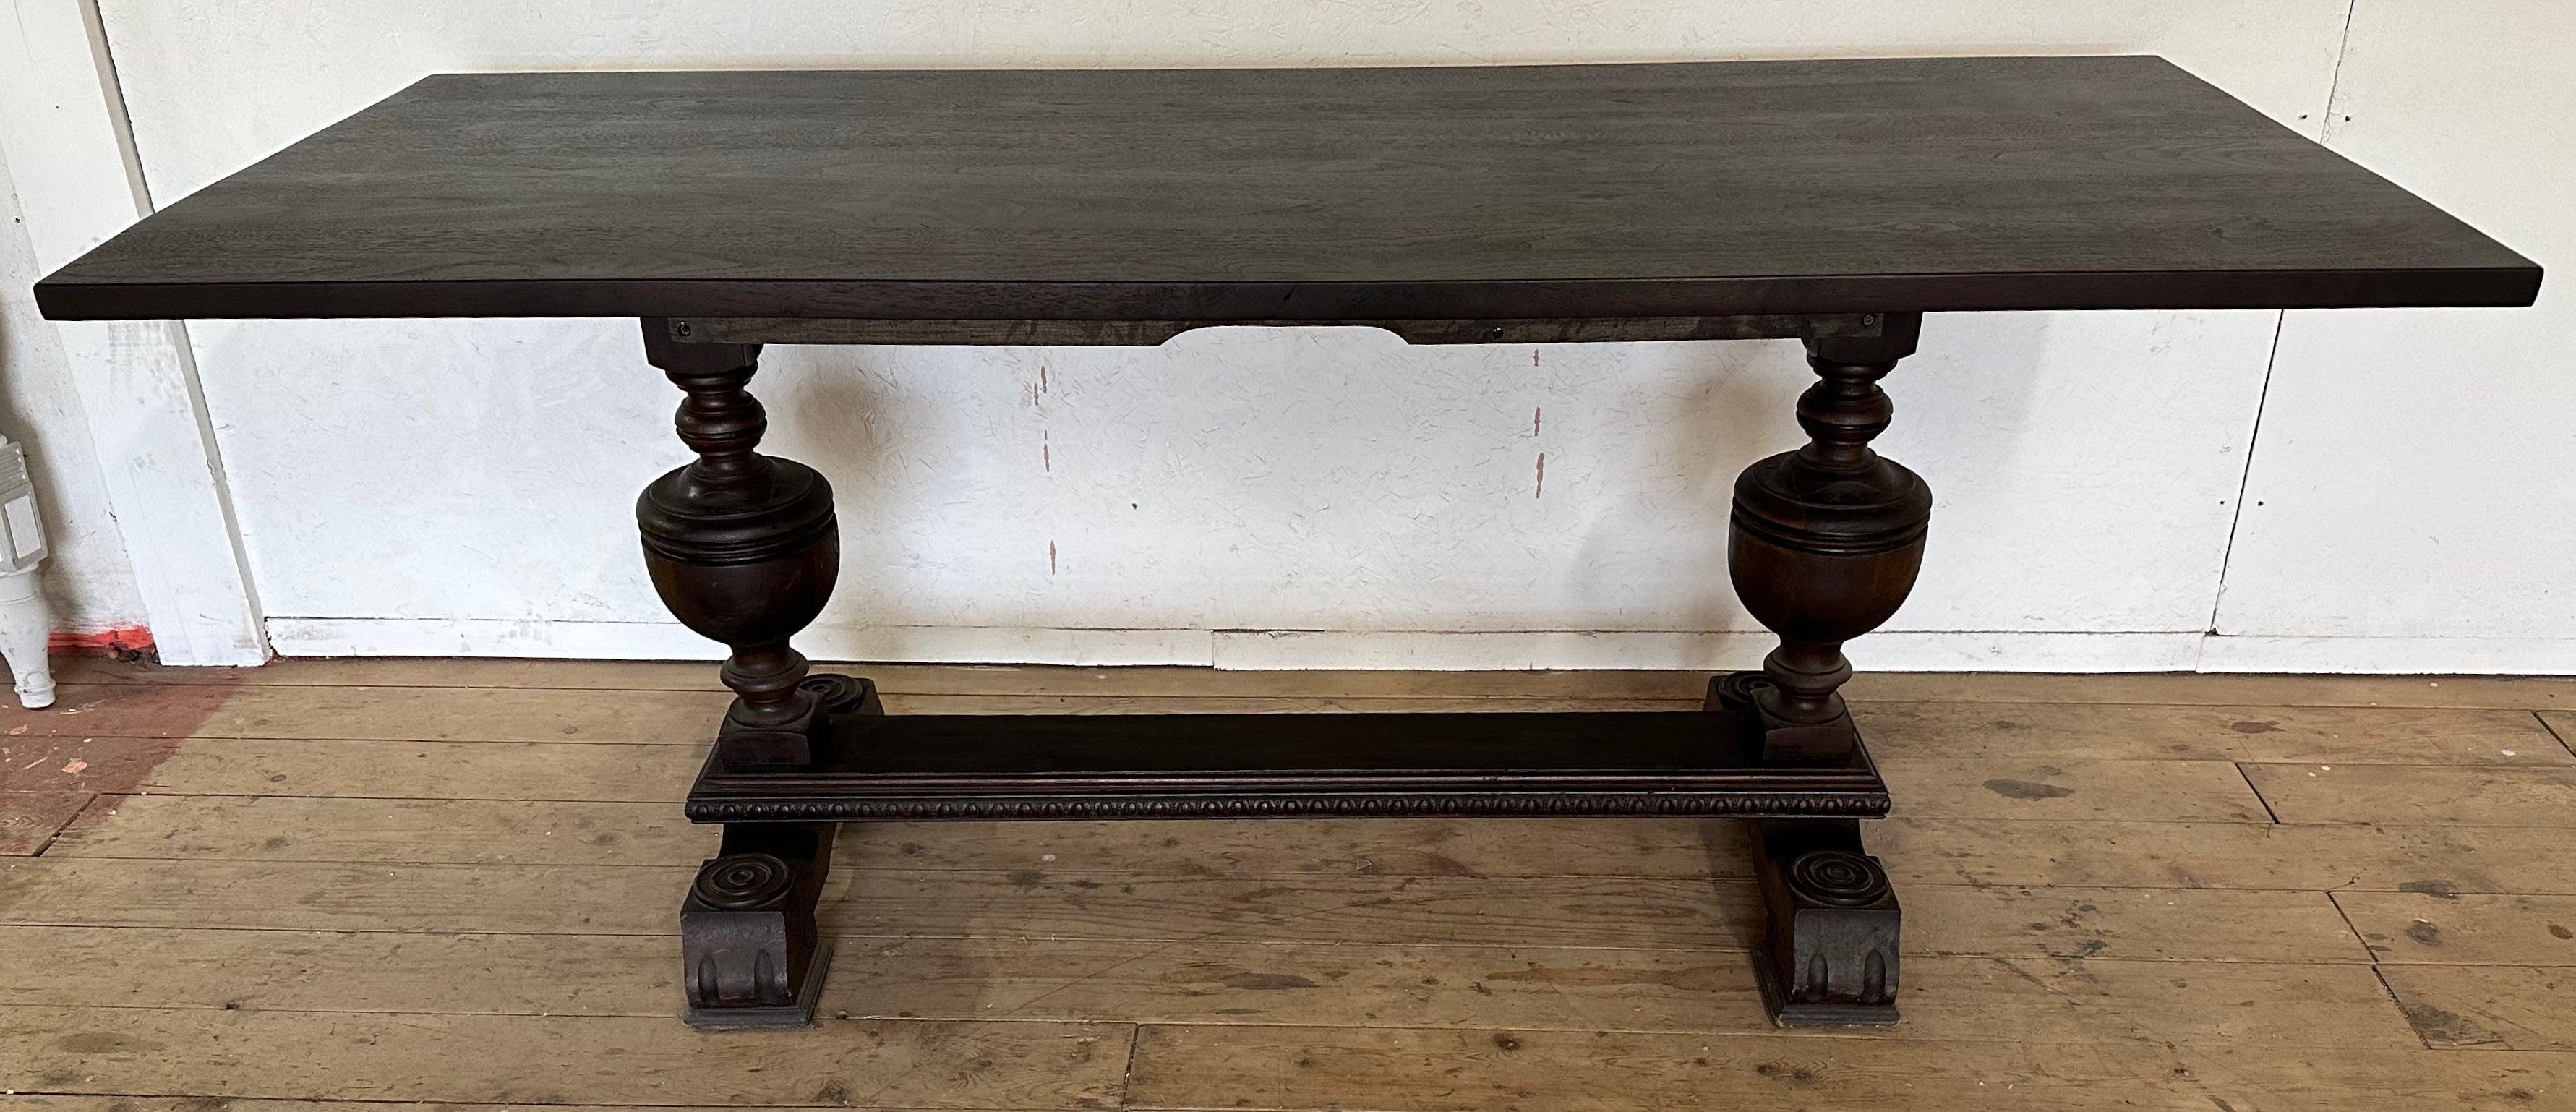 Elizabethan Jacobean style refectory table with carved melon shaped bulbous legs connected with stretchers. Use for dining table, library table, conference table, entry hallway, foyer or center hall table. 70